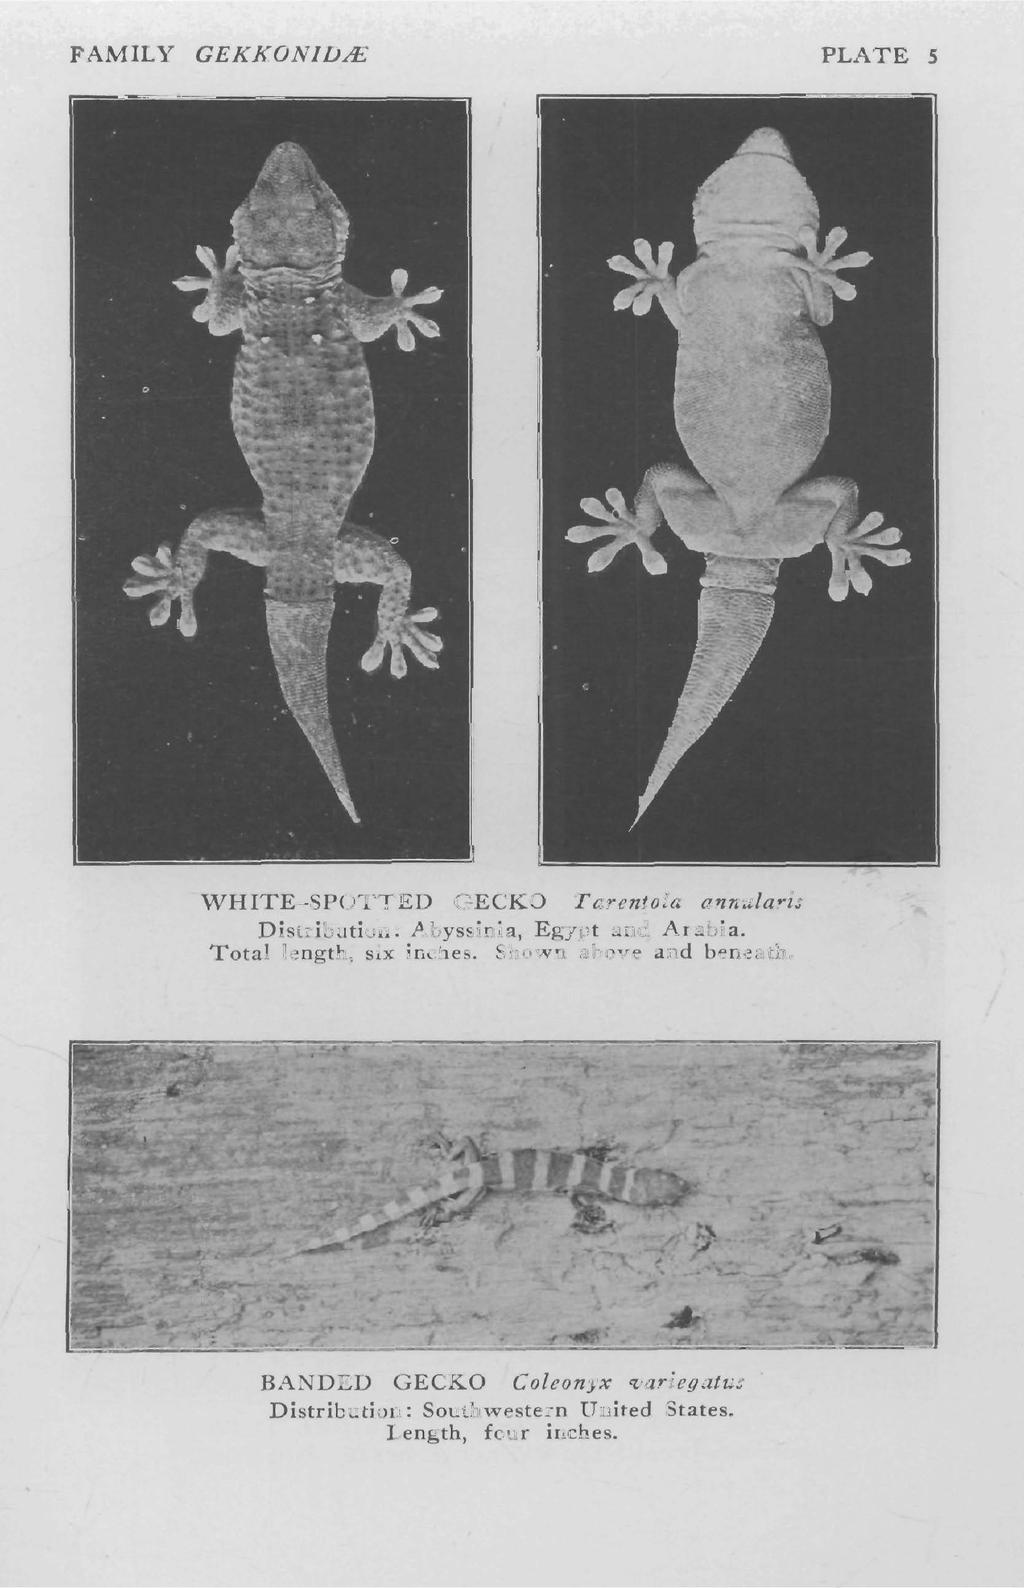 FAMILY GEKKONID/E PLATE 5 WHITE-SPOTTED GECKO T arentola annularis Distribution: Abyssinia, Egypt and Arabia.